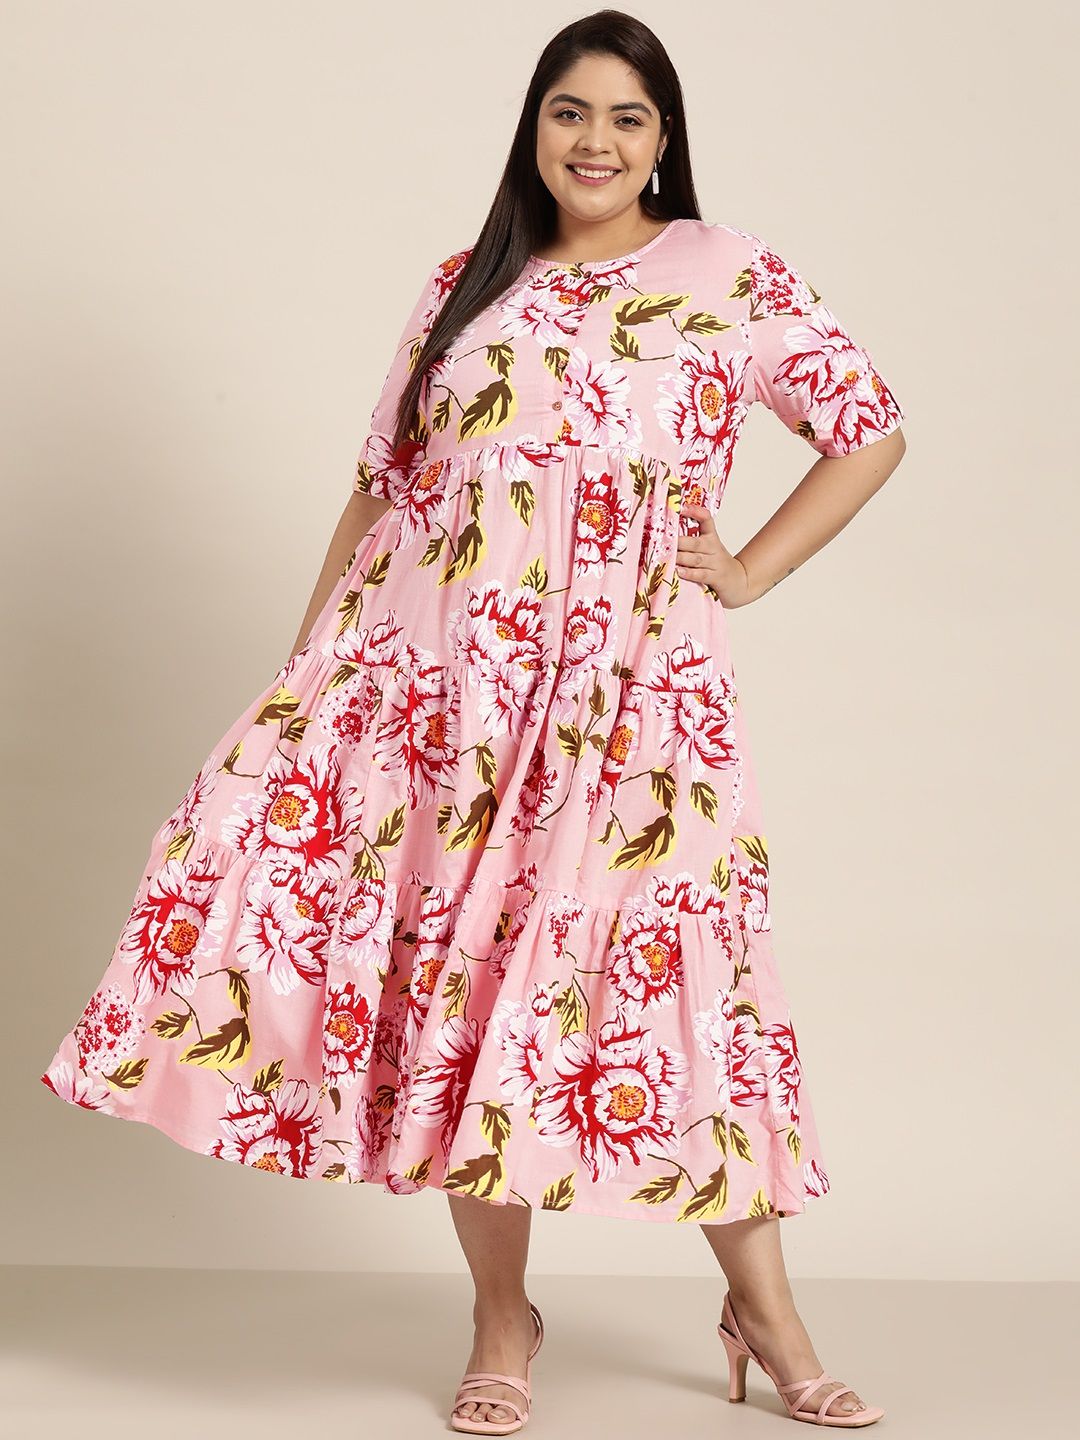 Sztori Plus Size Pink & White Floral Print Tiered Ethnic A-Line